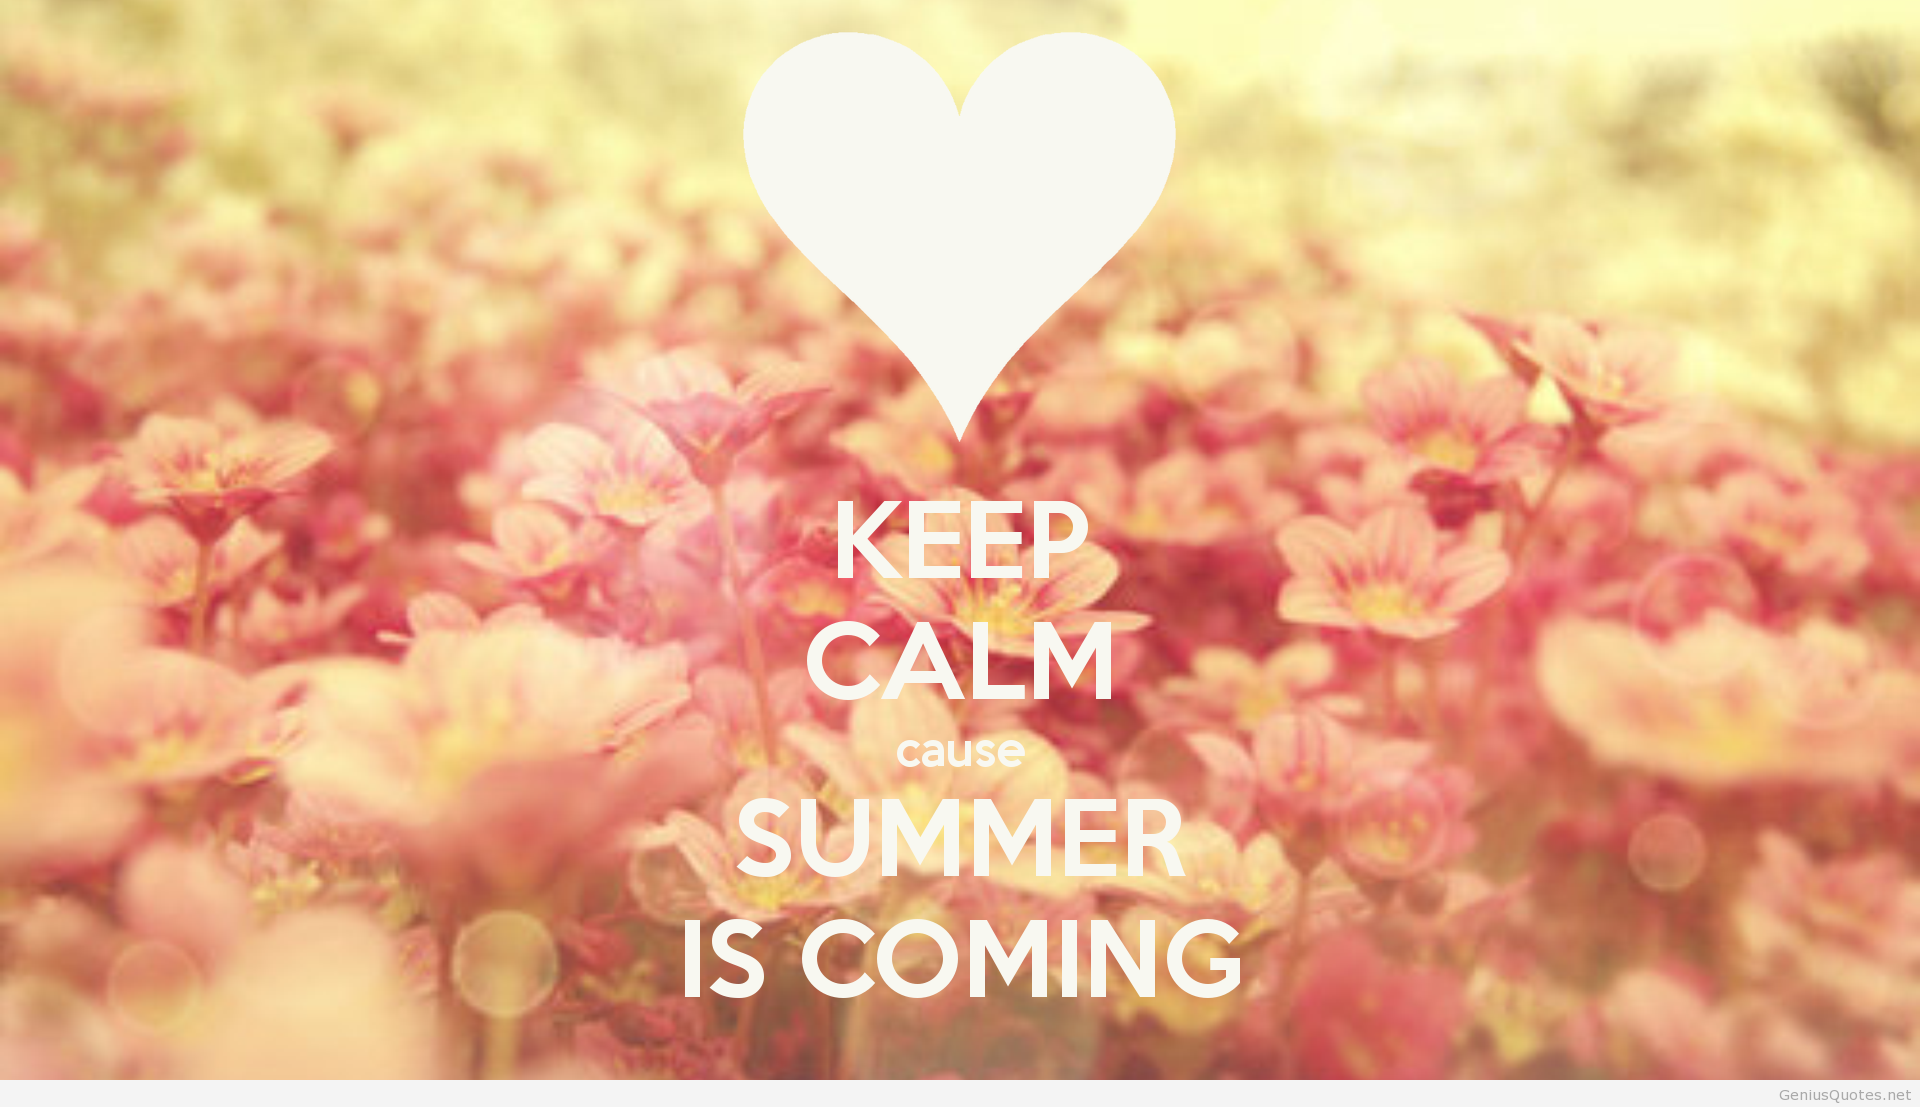 HD-wallpaper-summer-is-coming-quote